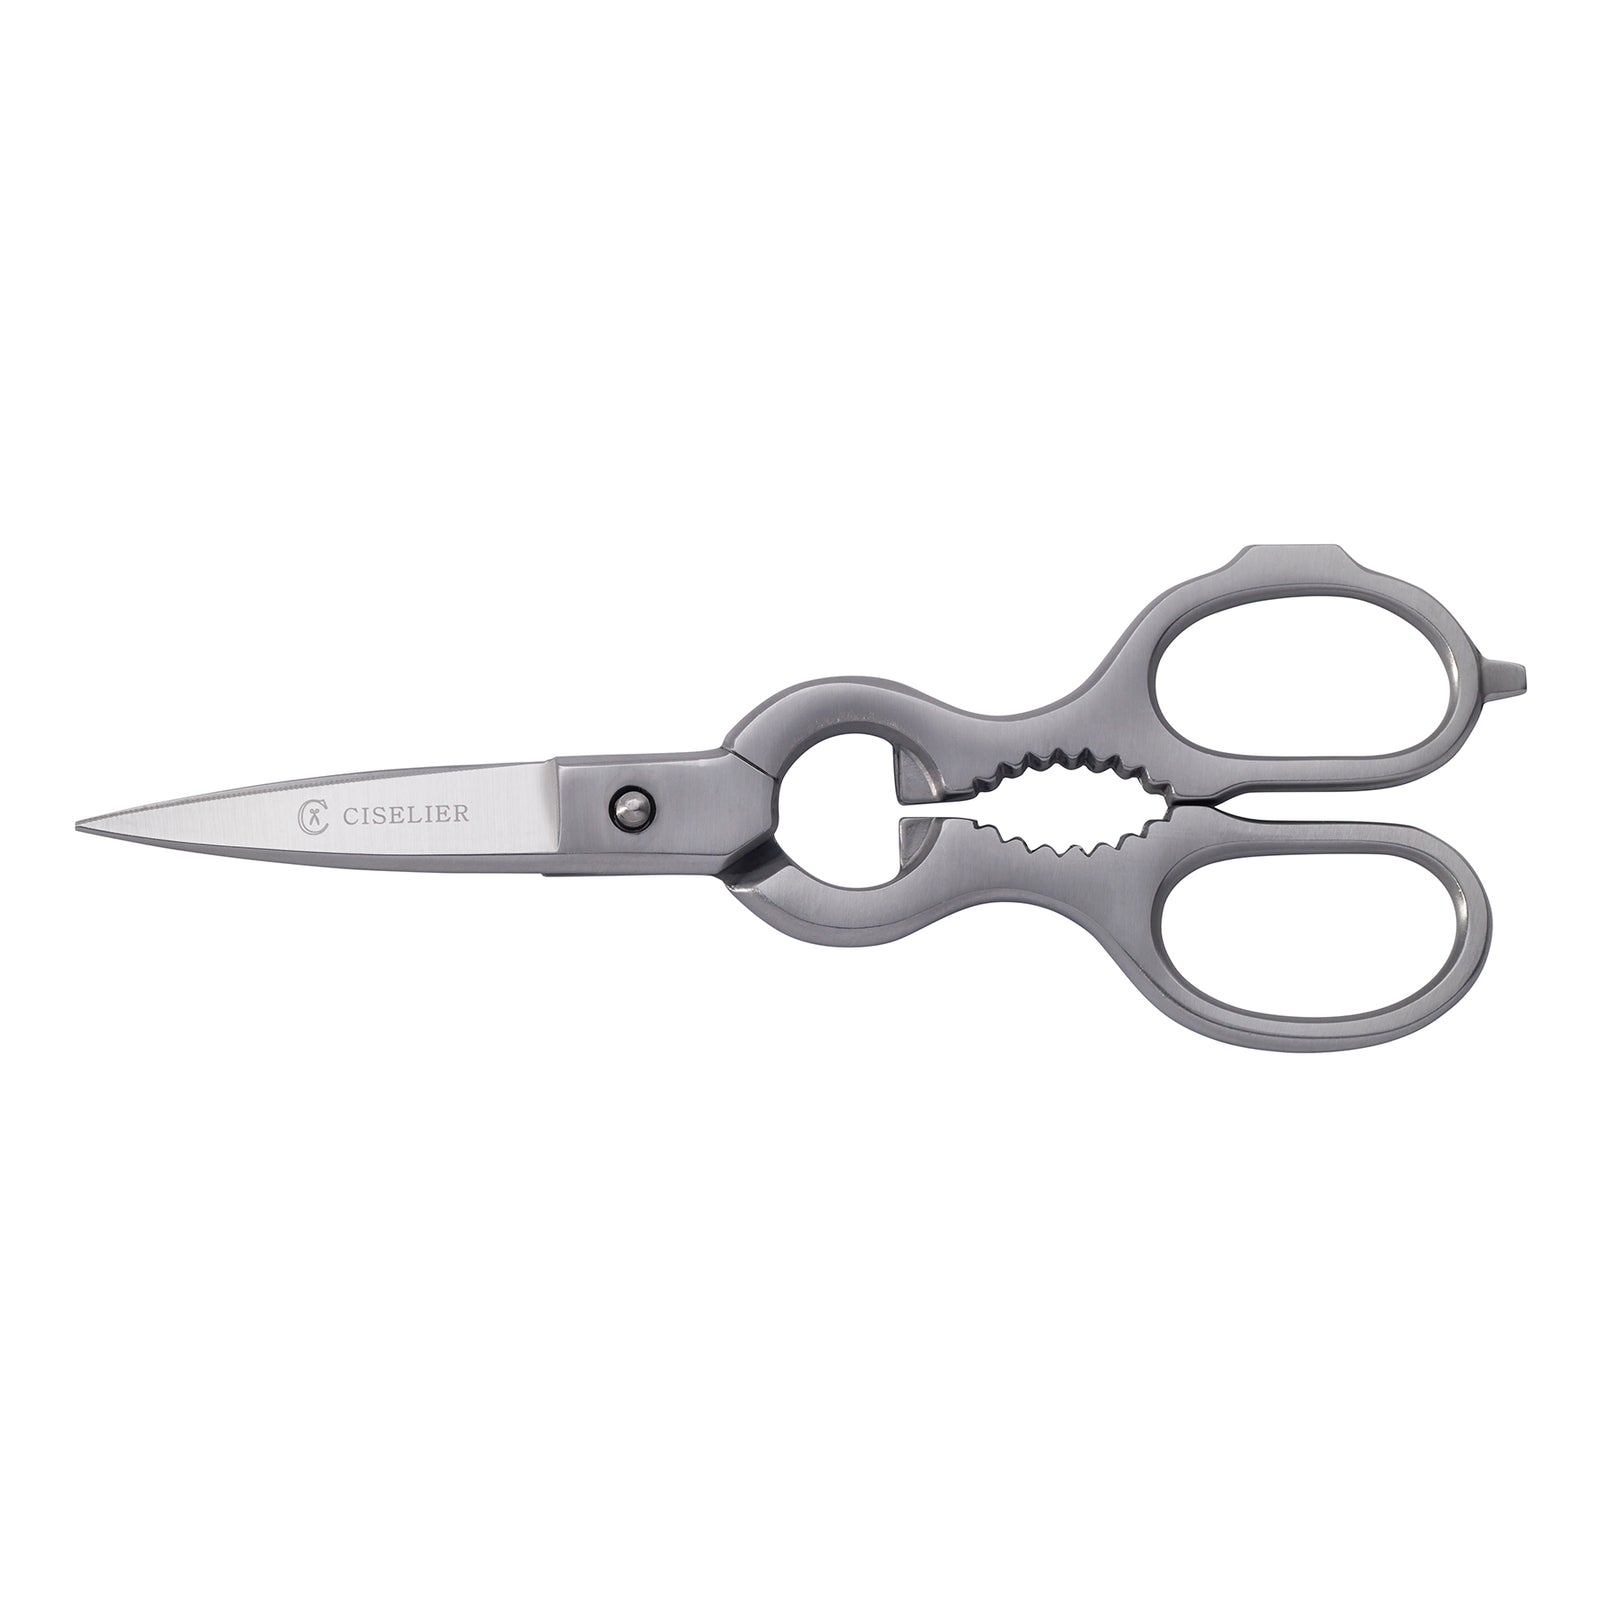 Choice 3 3/4 Stainless Steel All-Purpose Kitchen Shears with